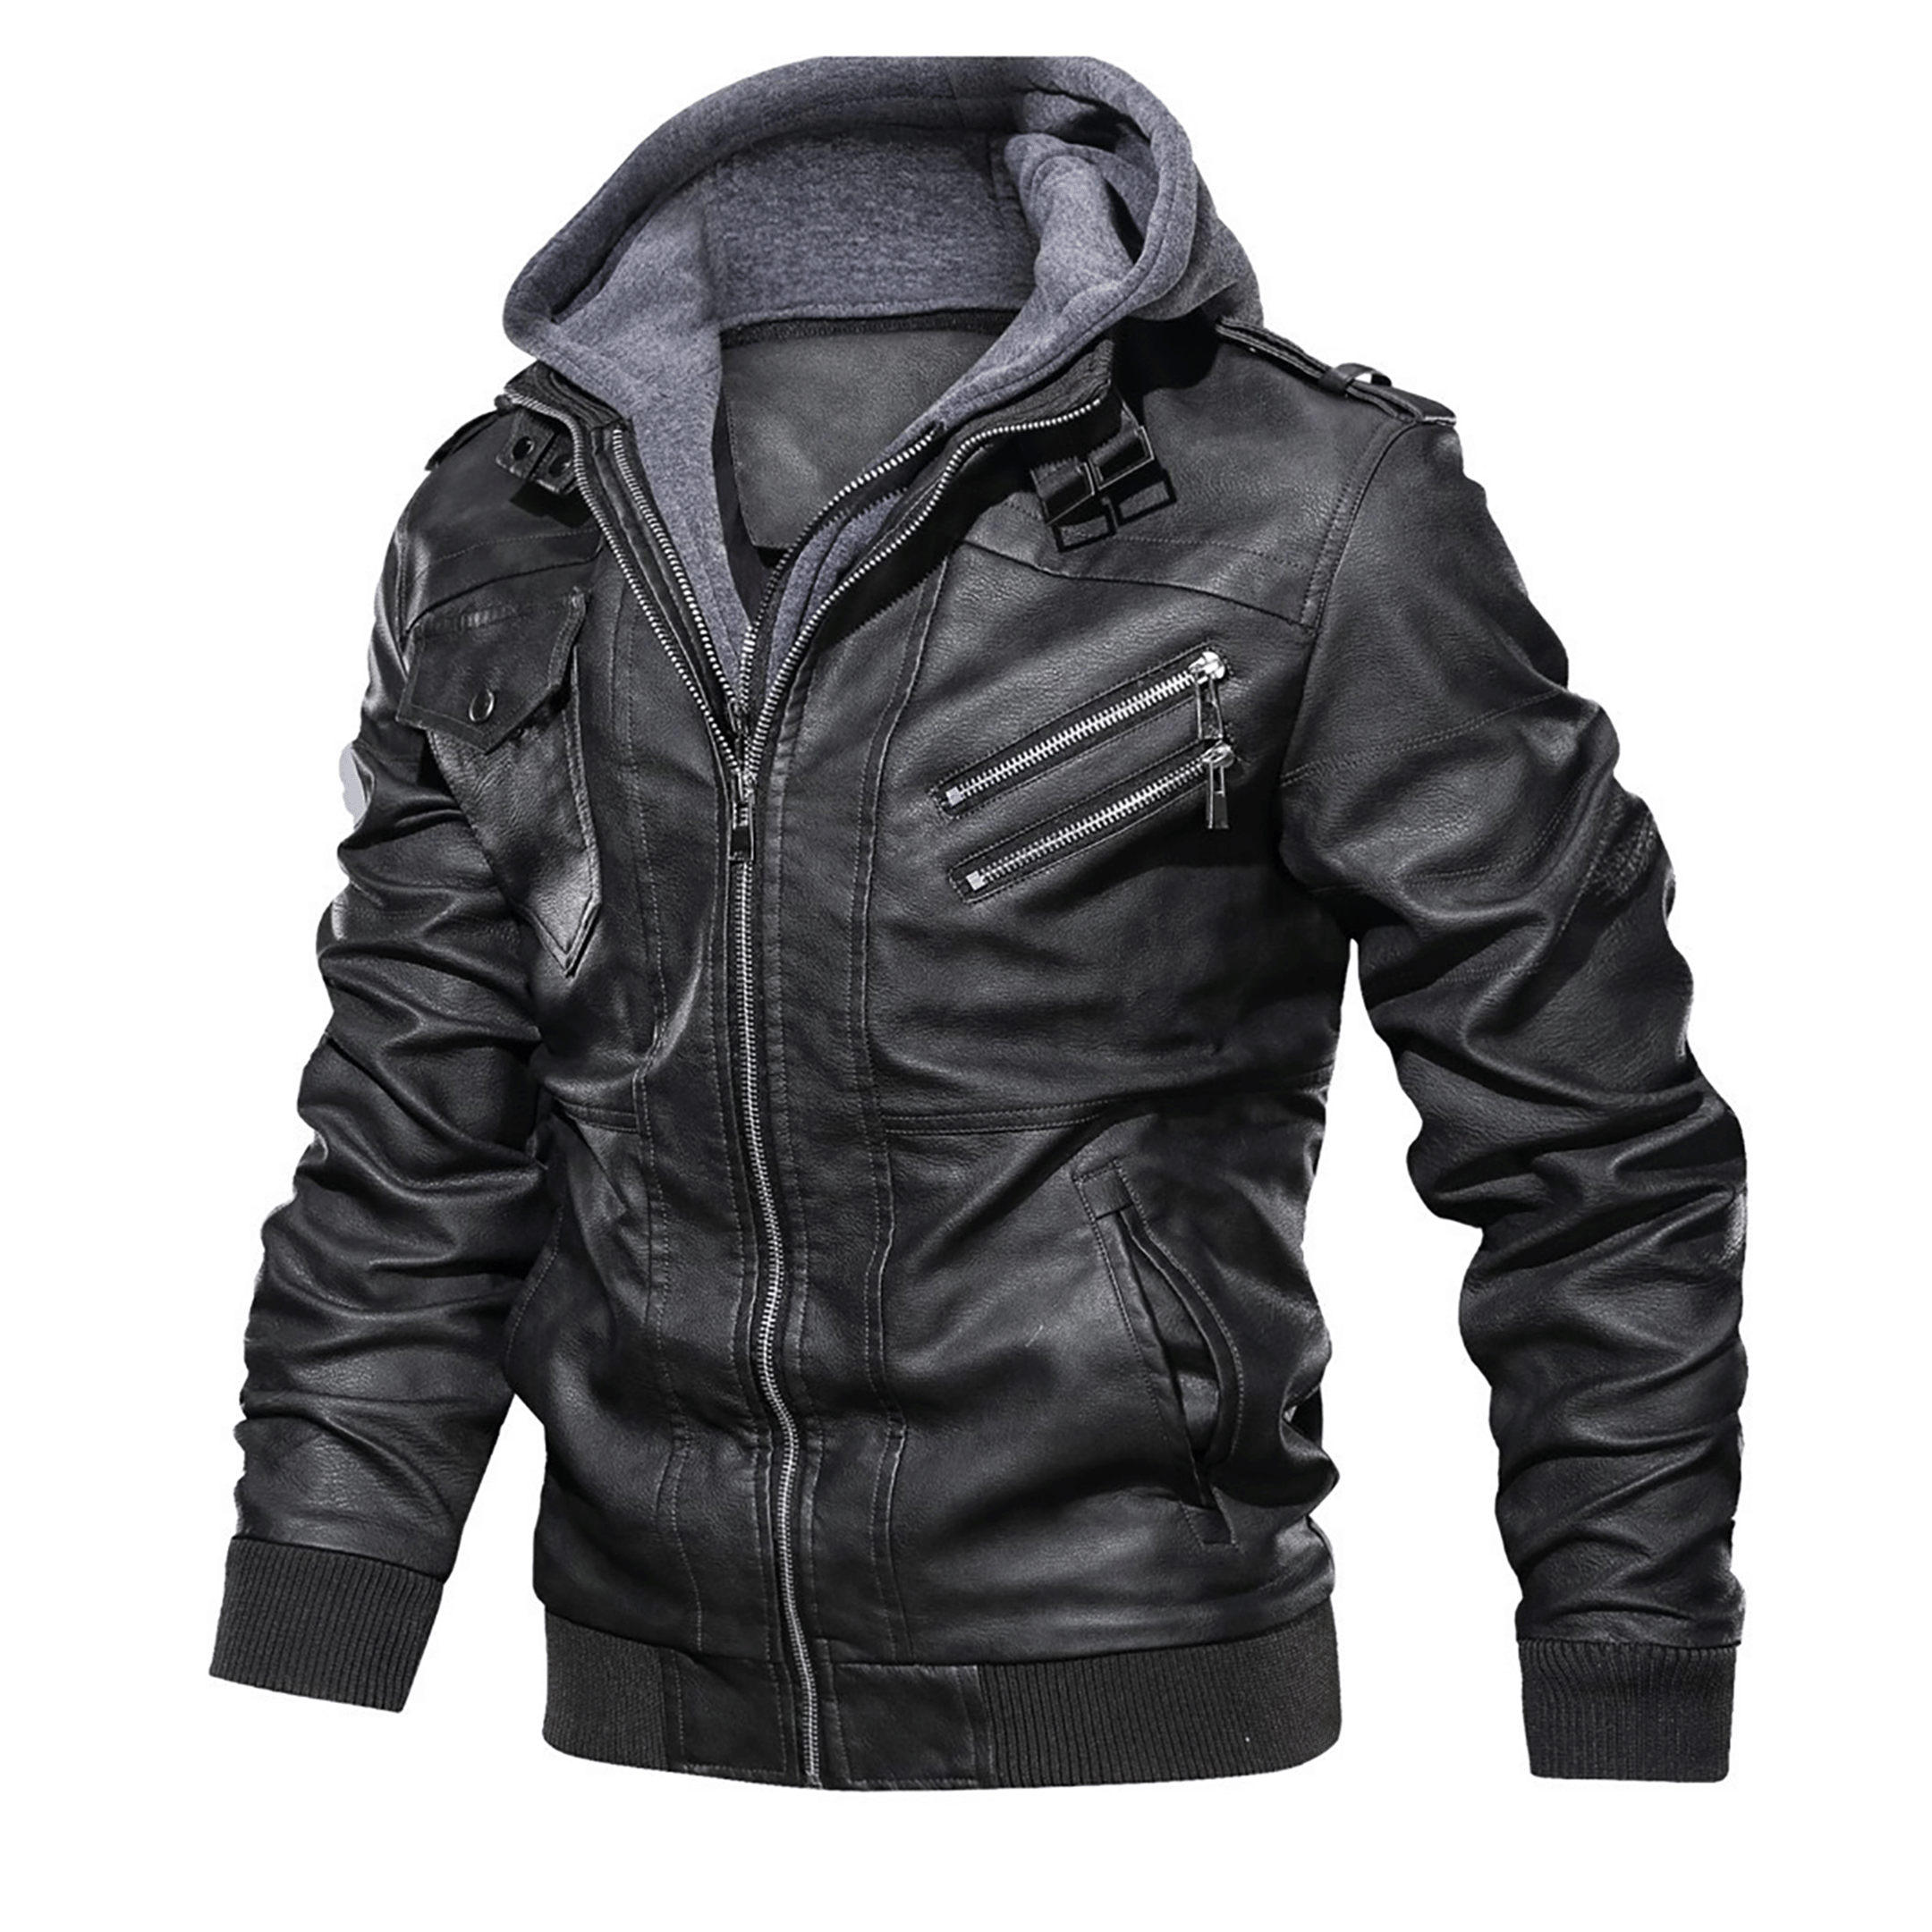 Top leather jackets and latest products 409